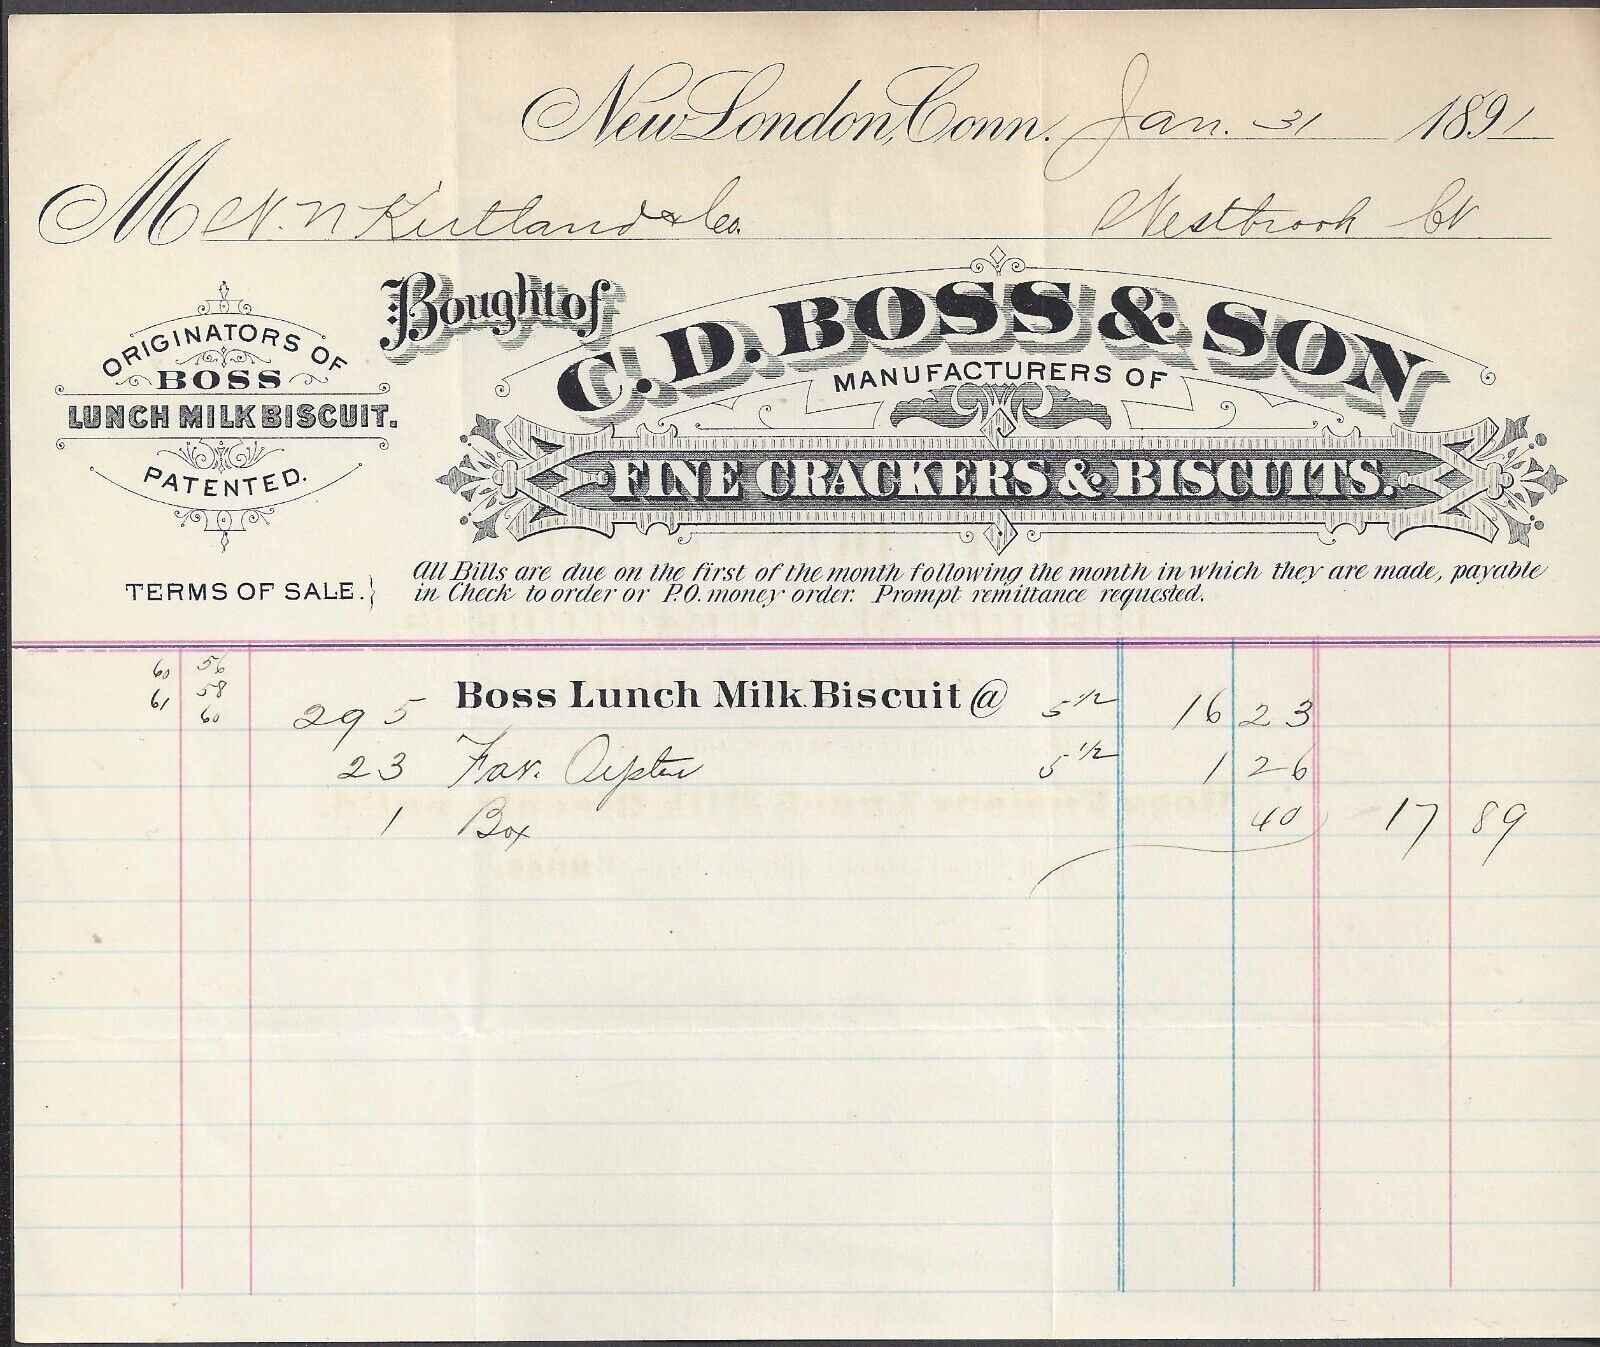 NEW LONDON, CT ~ C. D. BOSS & SON, MFRS. OF CRACKERS & BISCUITS ~ BILLHEAD 1891